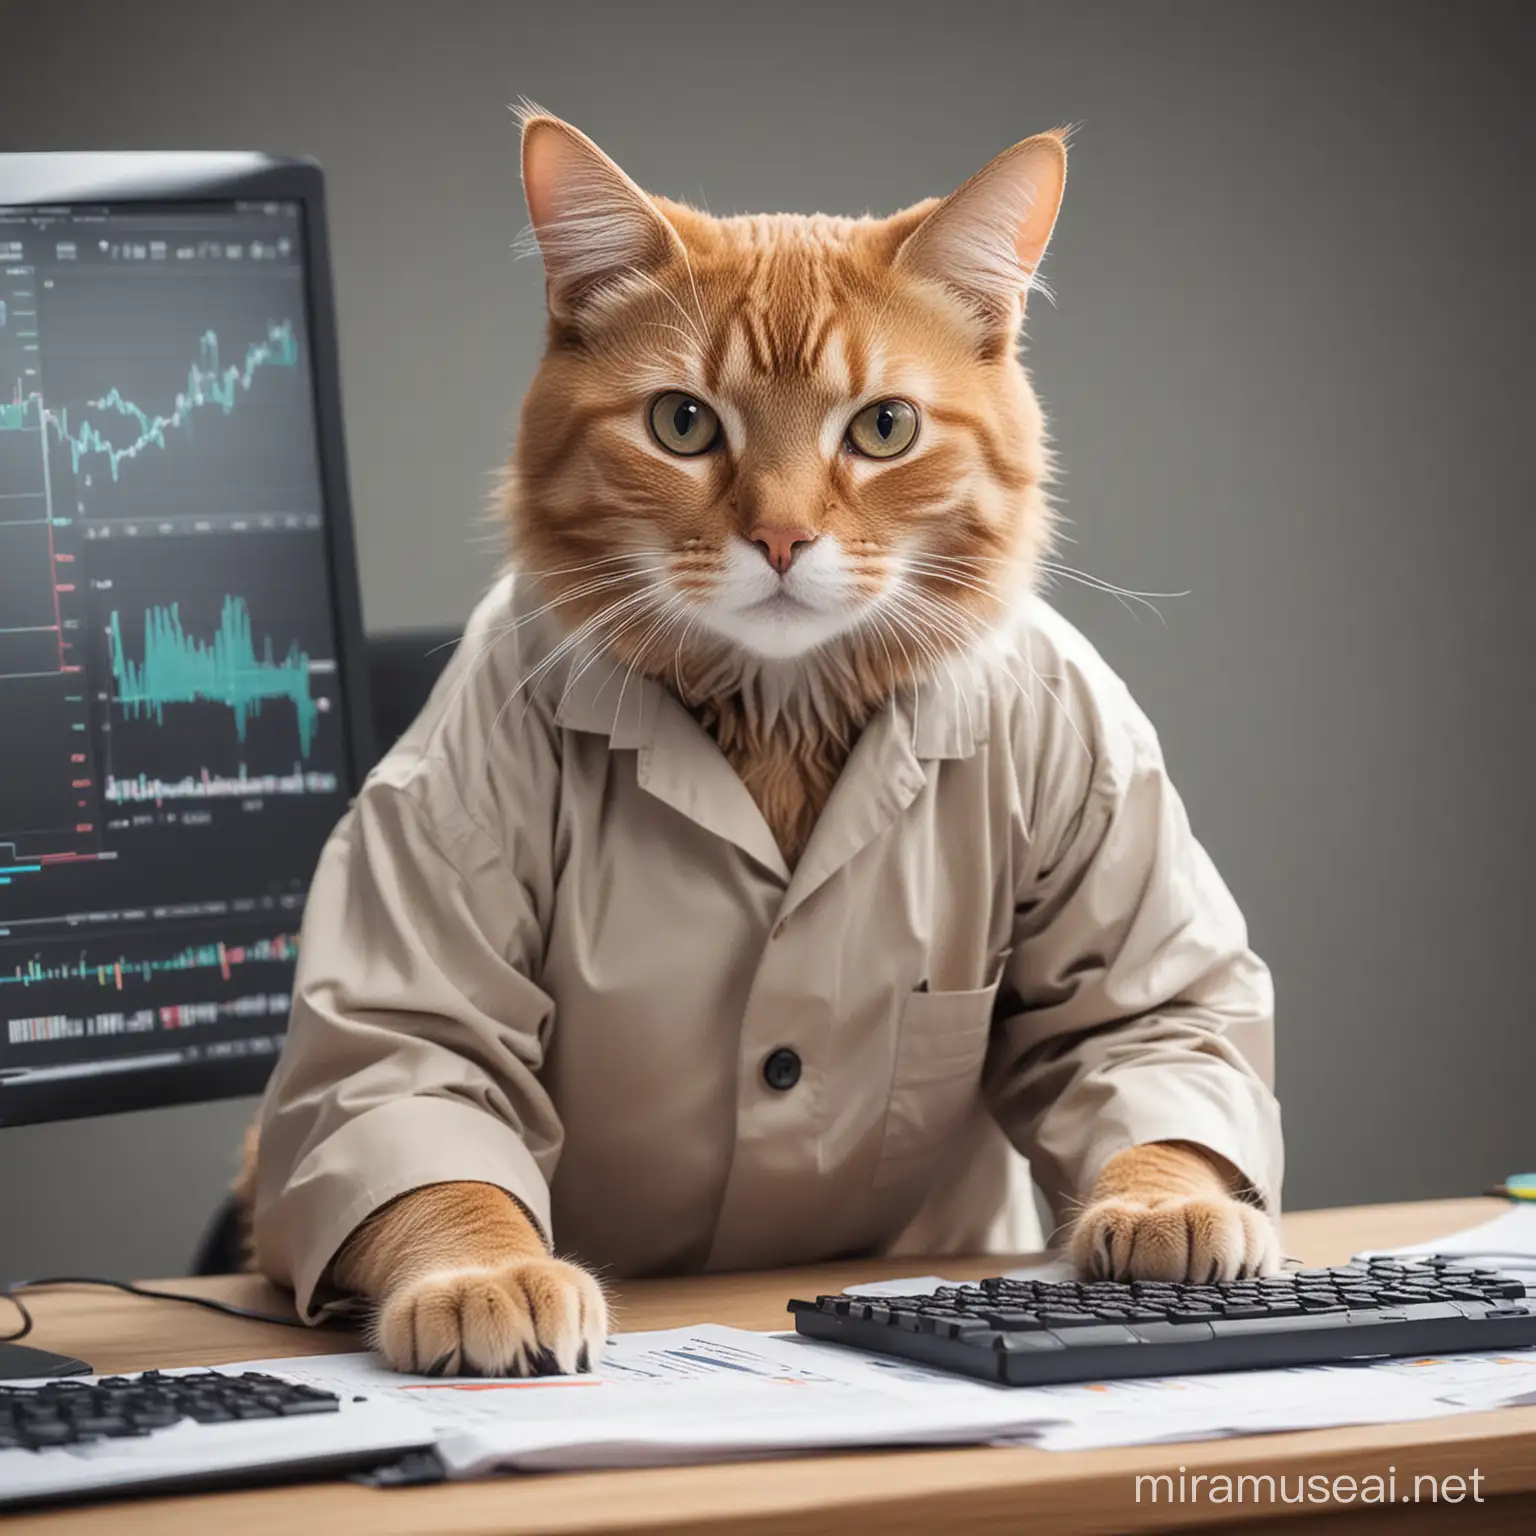 Data Analyst Cat Working on Charts and Graphs